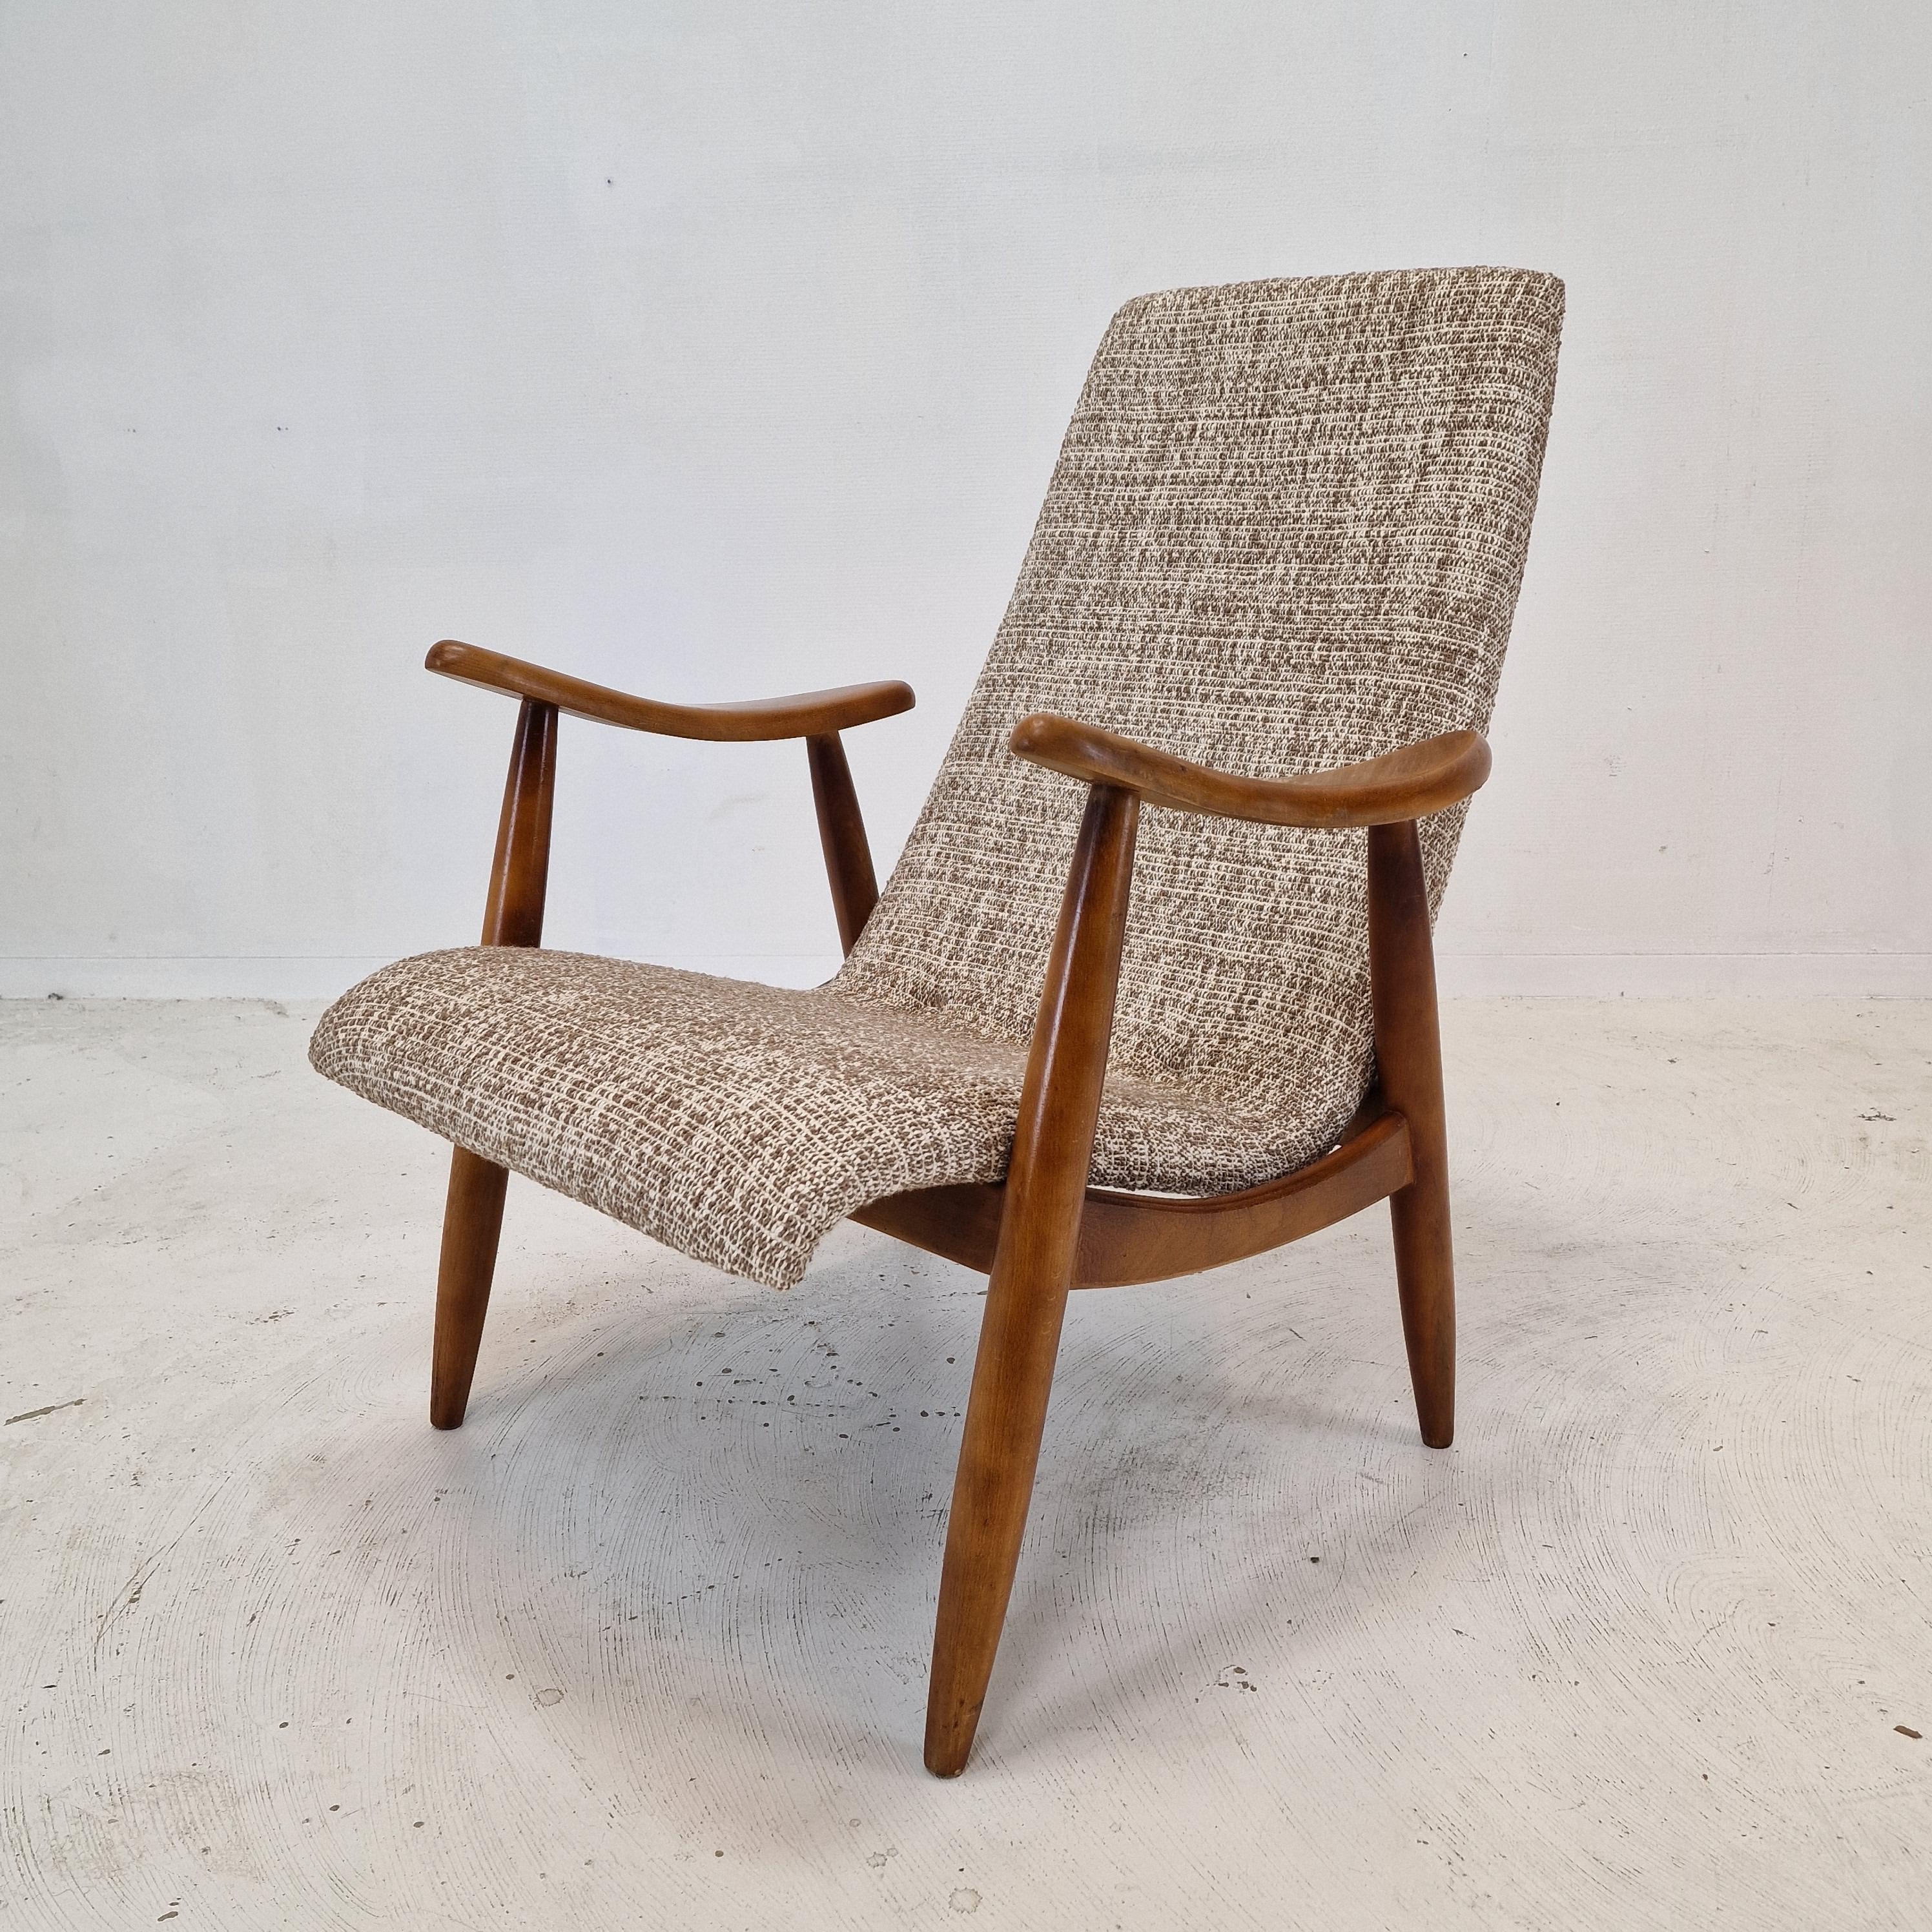 Lovely lounge chair, designed and fabricated in the 1960s in Denmark.

The elegant structure of this comfortable chair is made of solid teak.

The chair is just restored with new foam and new fabric.
It is upholstered with beautiful wool